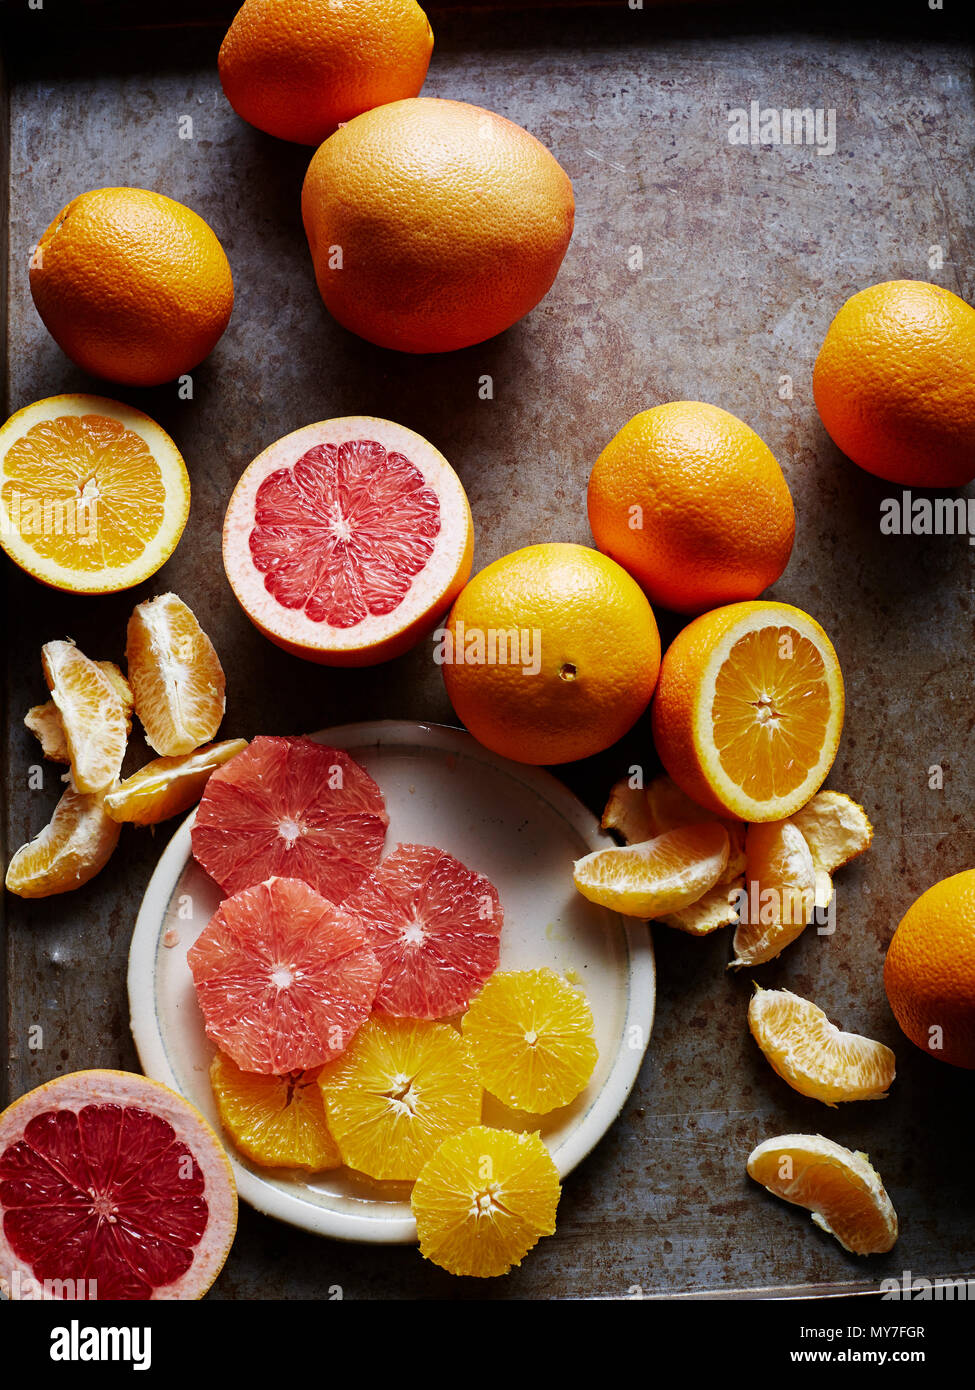 Still life with oranges and grapefruit, whole halved and sliced, overhead view Stock Photo